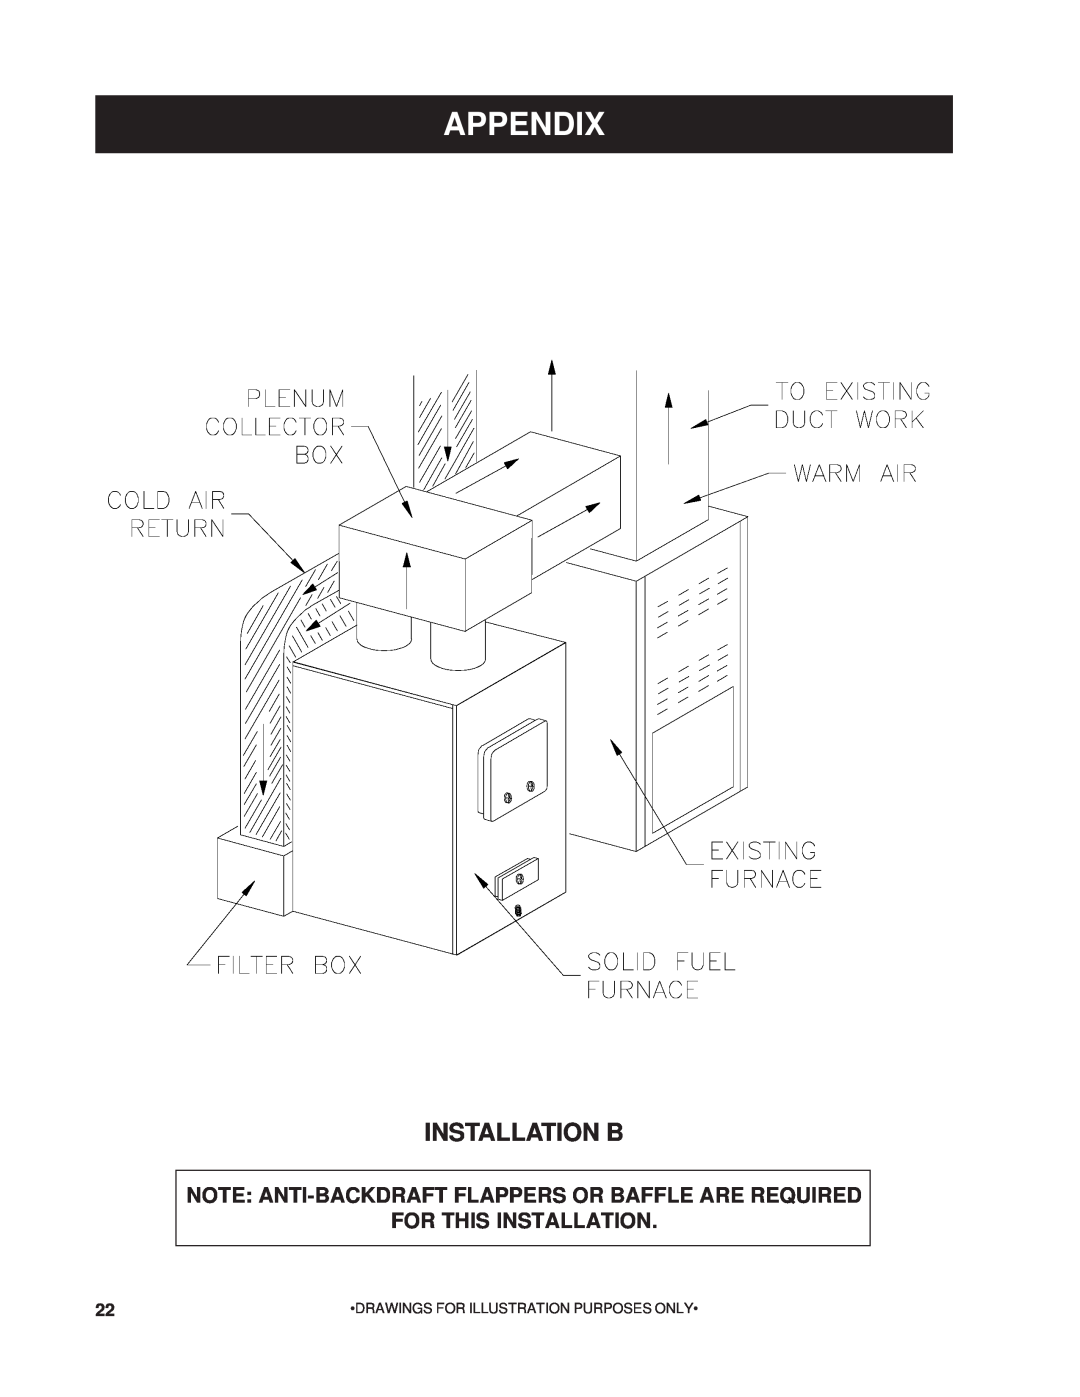 United States Stove 1200Q Installation B, Appendix, For This Installation, •Drawings For Illustration Purposes Only• 